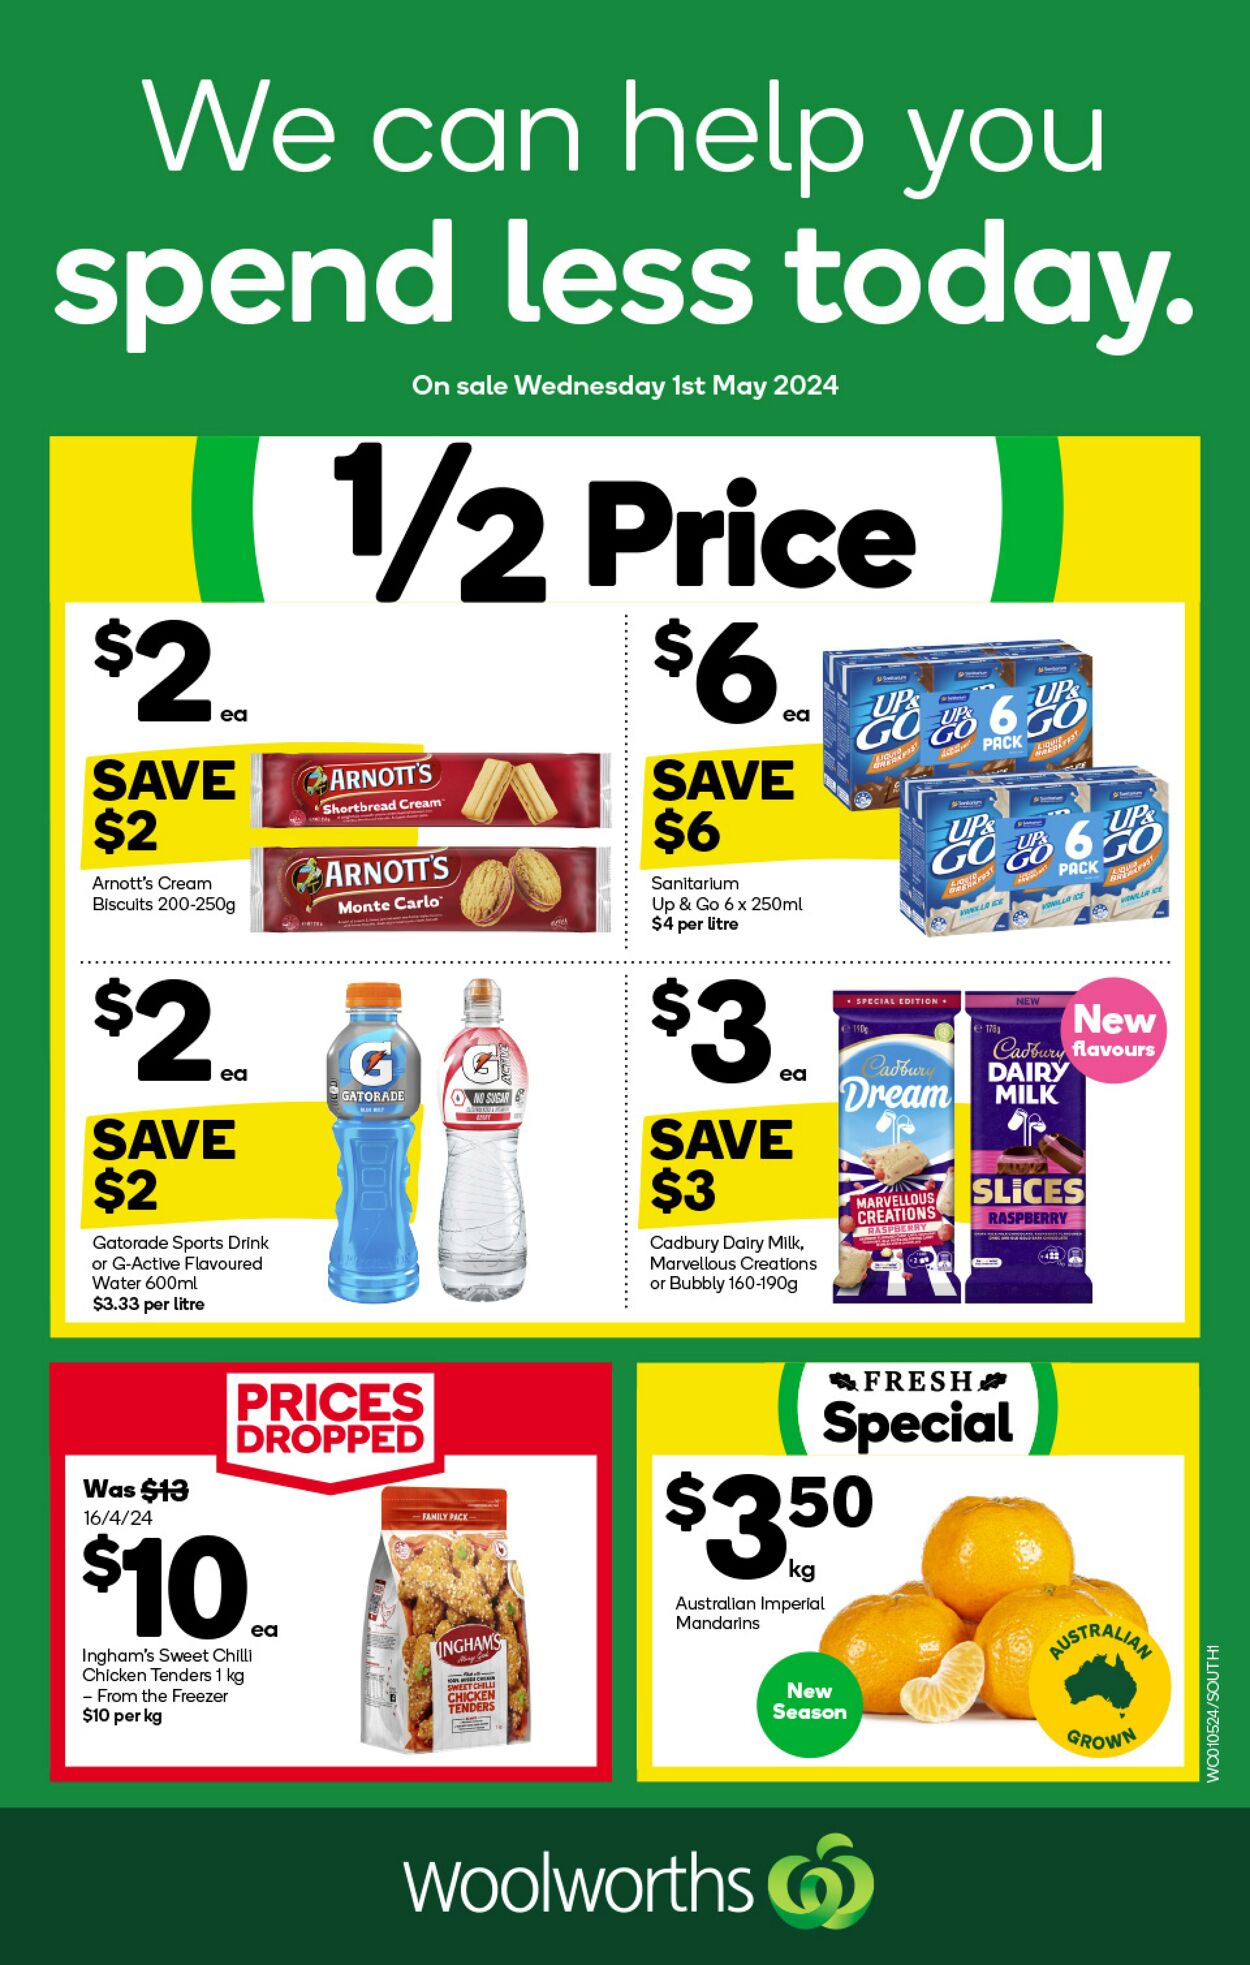 Catalogue Woolworths - Weekly Specials Catalogue NSW South 1 May, 2024 - 7 May, 2024